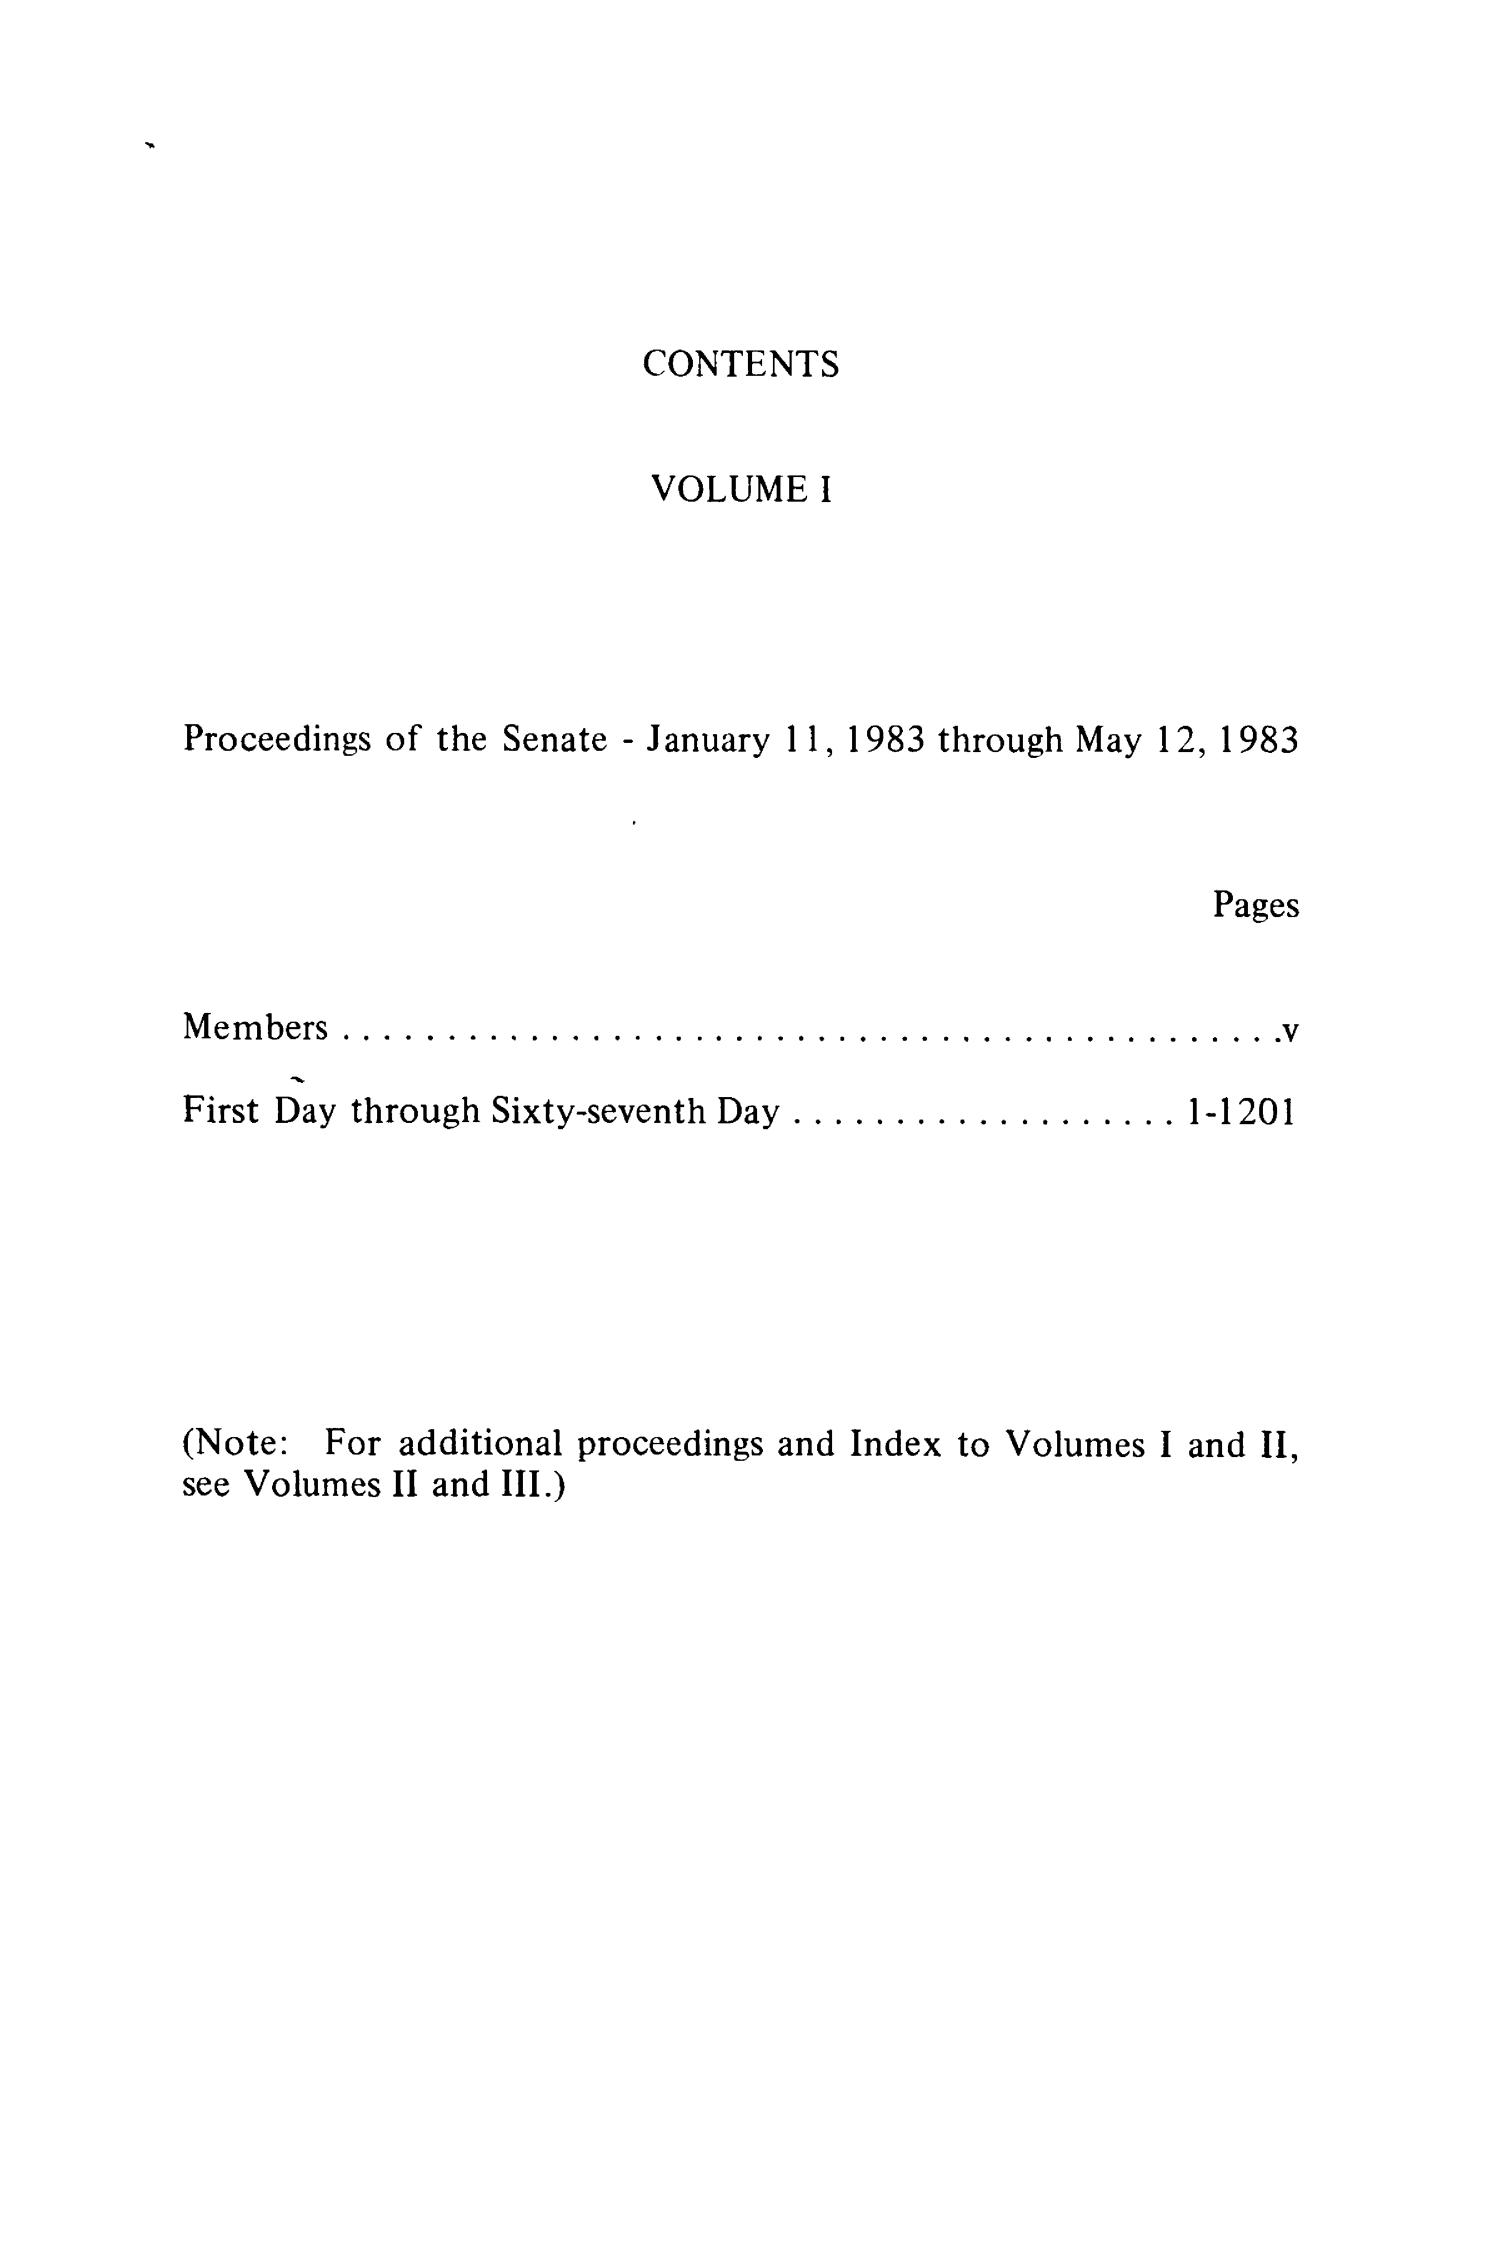 Journal of the Senate of the State of Texas, Regular Session of the Sixty-Eighth Legislature, Volume 1
                                                
                                                    None
                                                